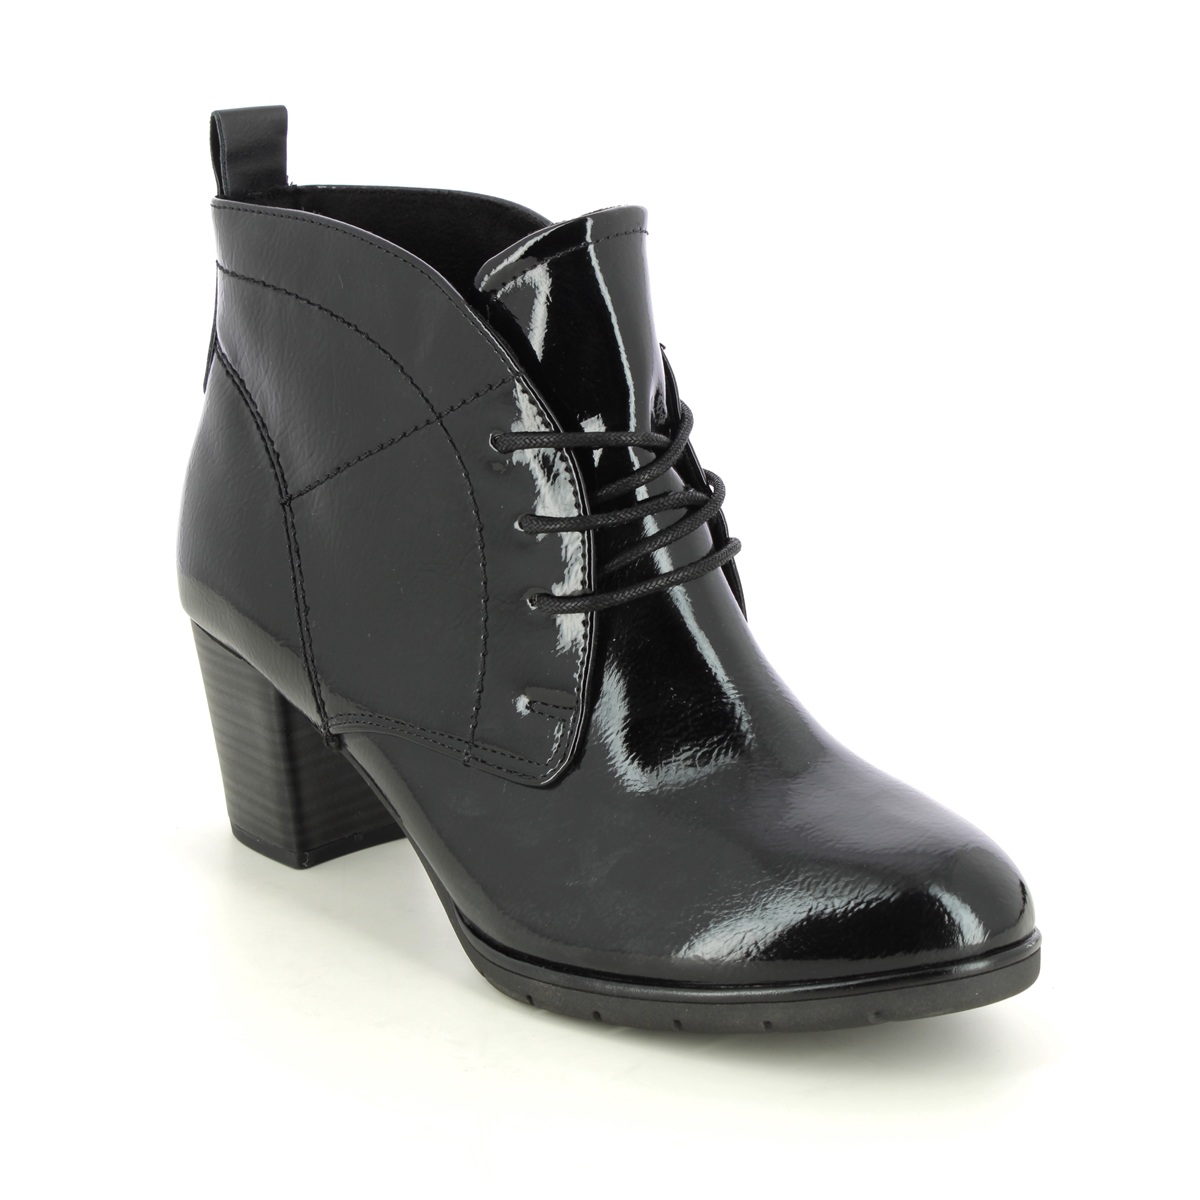 Marco Tozzi Pepalow Black Patent Womens Heeled Boots 25109-41-018 In Size 38 In Plain Black Patent